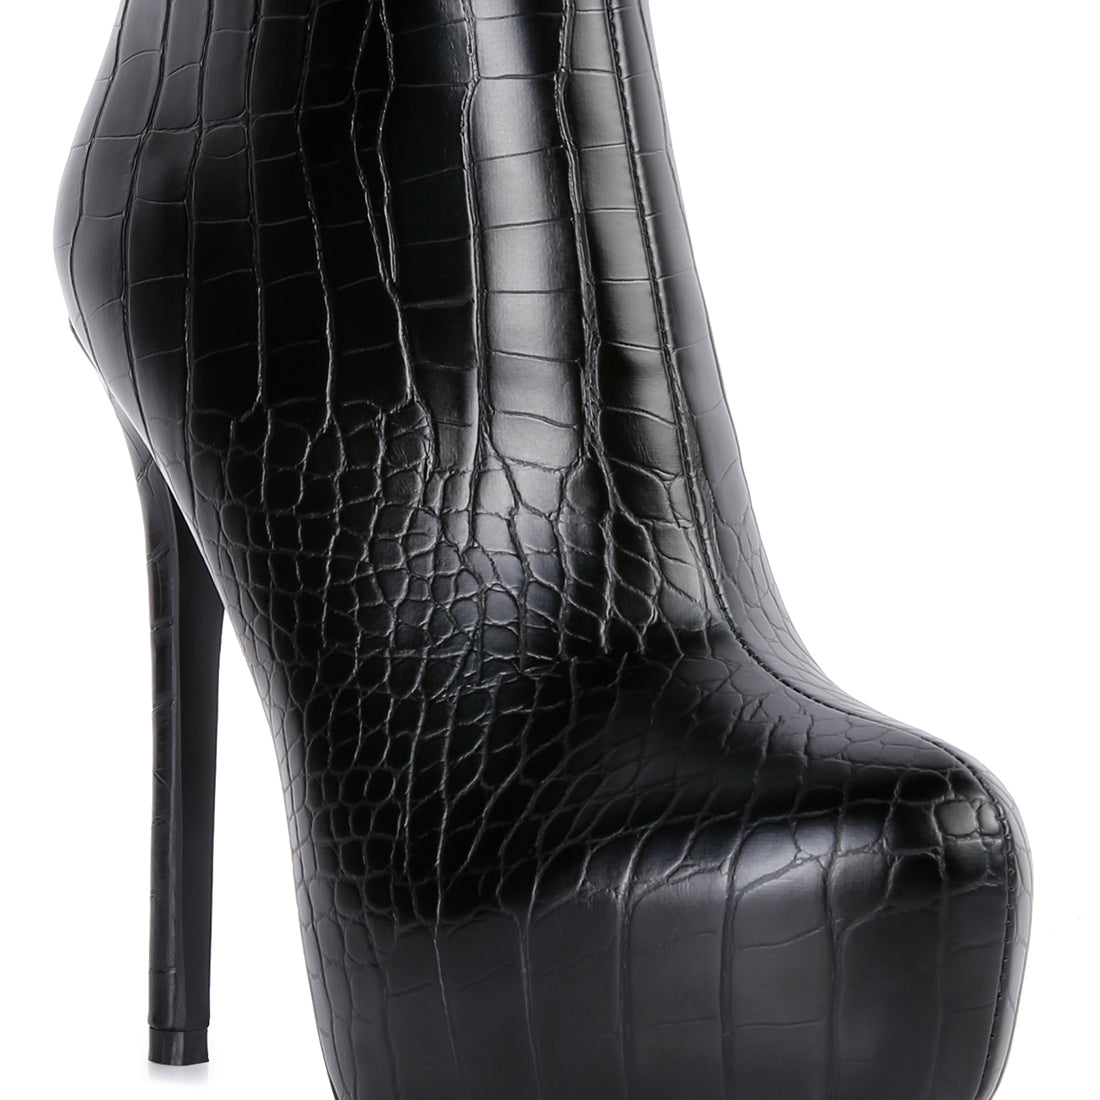 Black High Heeled Croc Pattern Ankle Boot